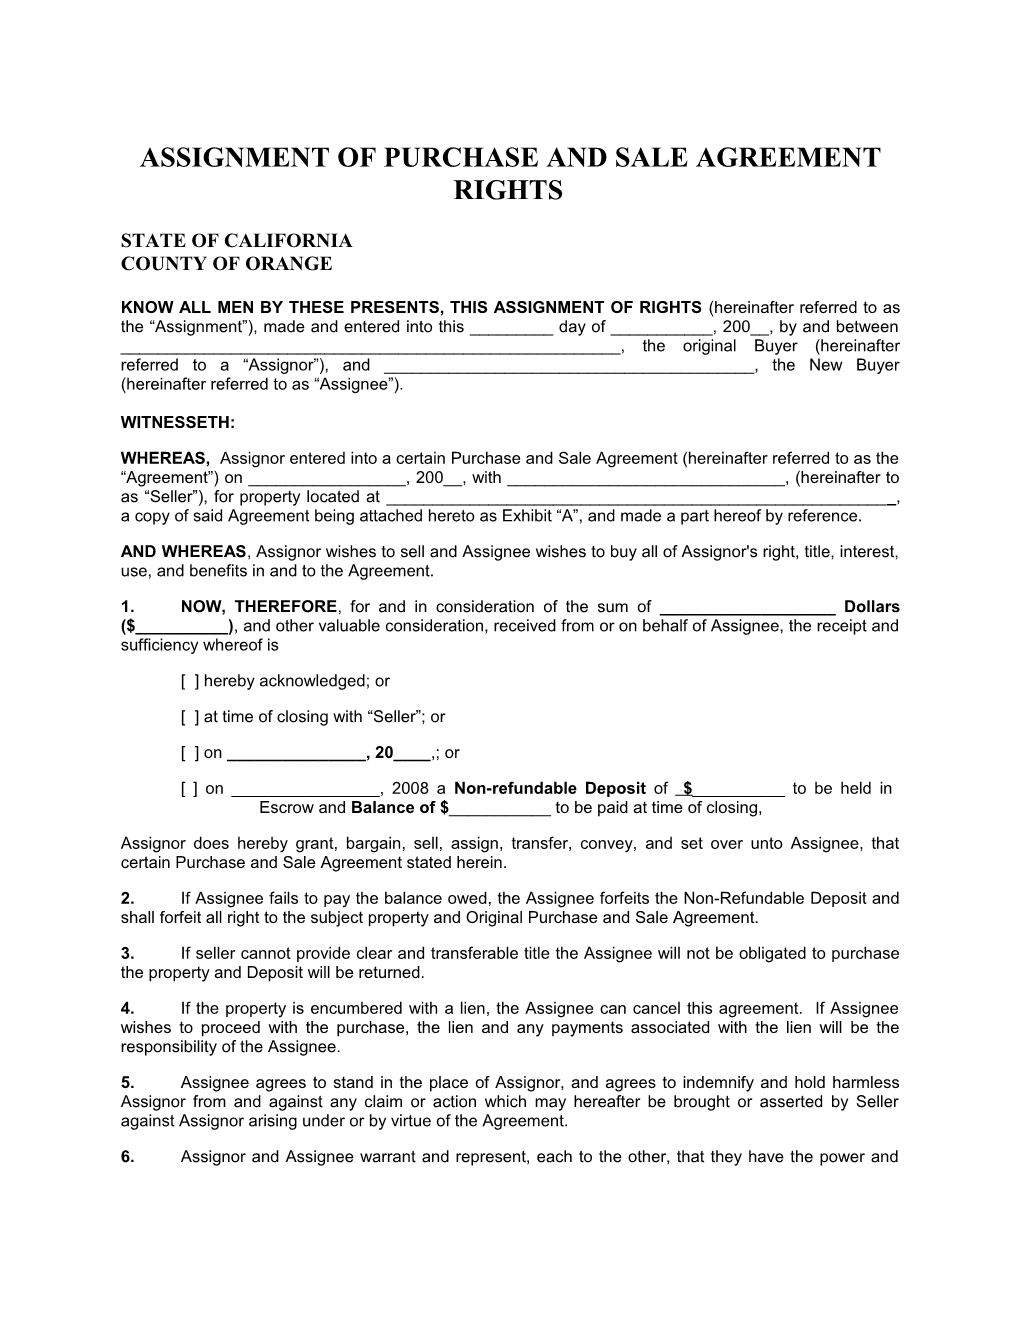 Assignment of Purchase and Sale Agreement Rights